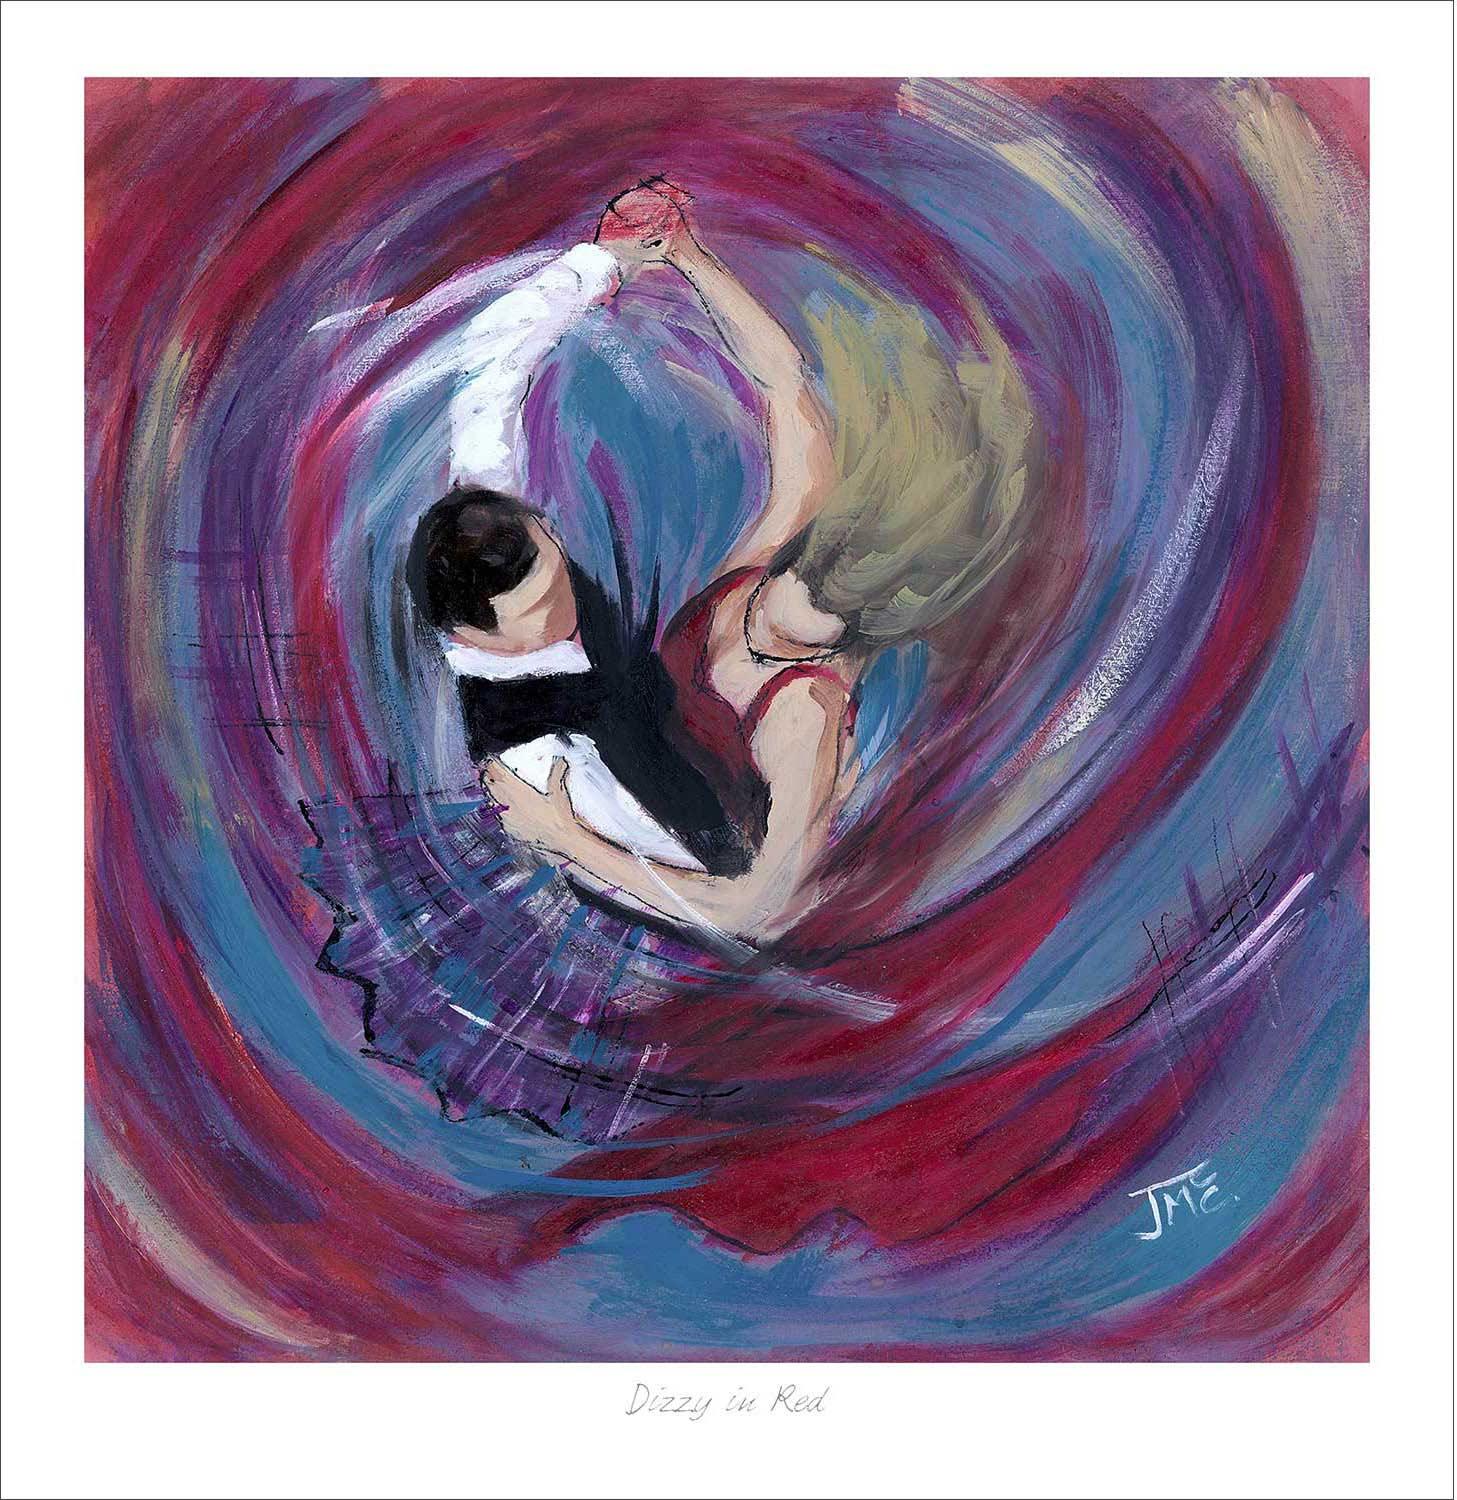 Dizzy in Red Art Print from an original painting by artist Janet McCrorie